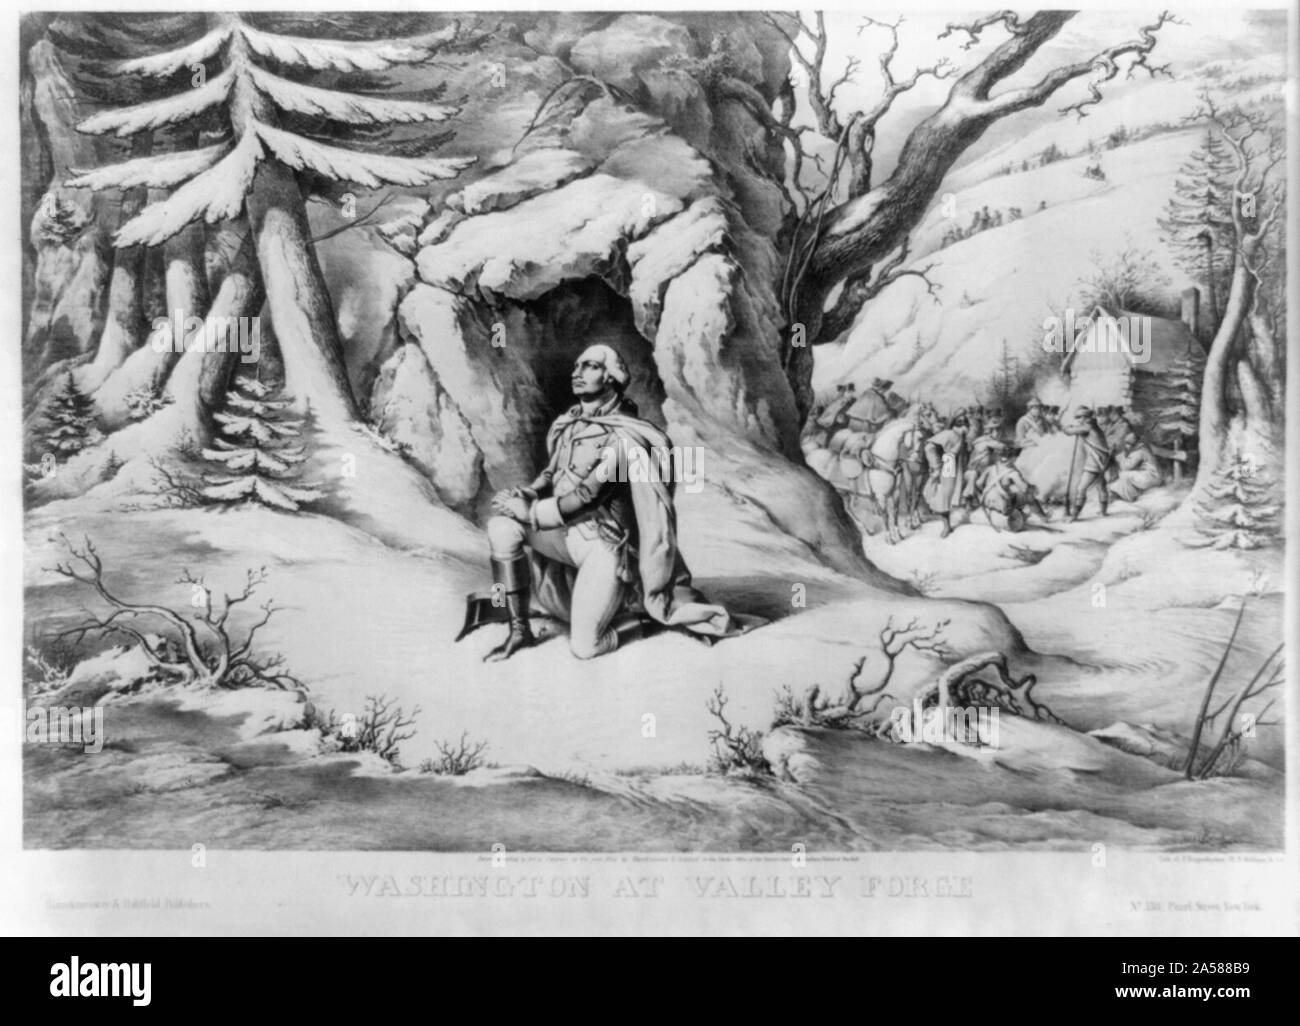 Washington at Valley Forge Abstract: Print shows General George Washington praying in the snow at Valley Forge, Pennsylvania. In the background are Washington's soldiers and officers Stock Photo